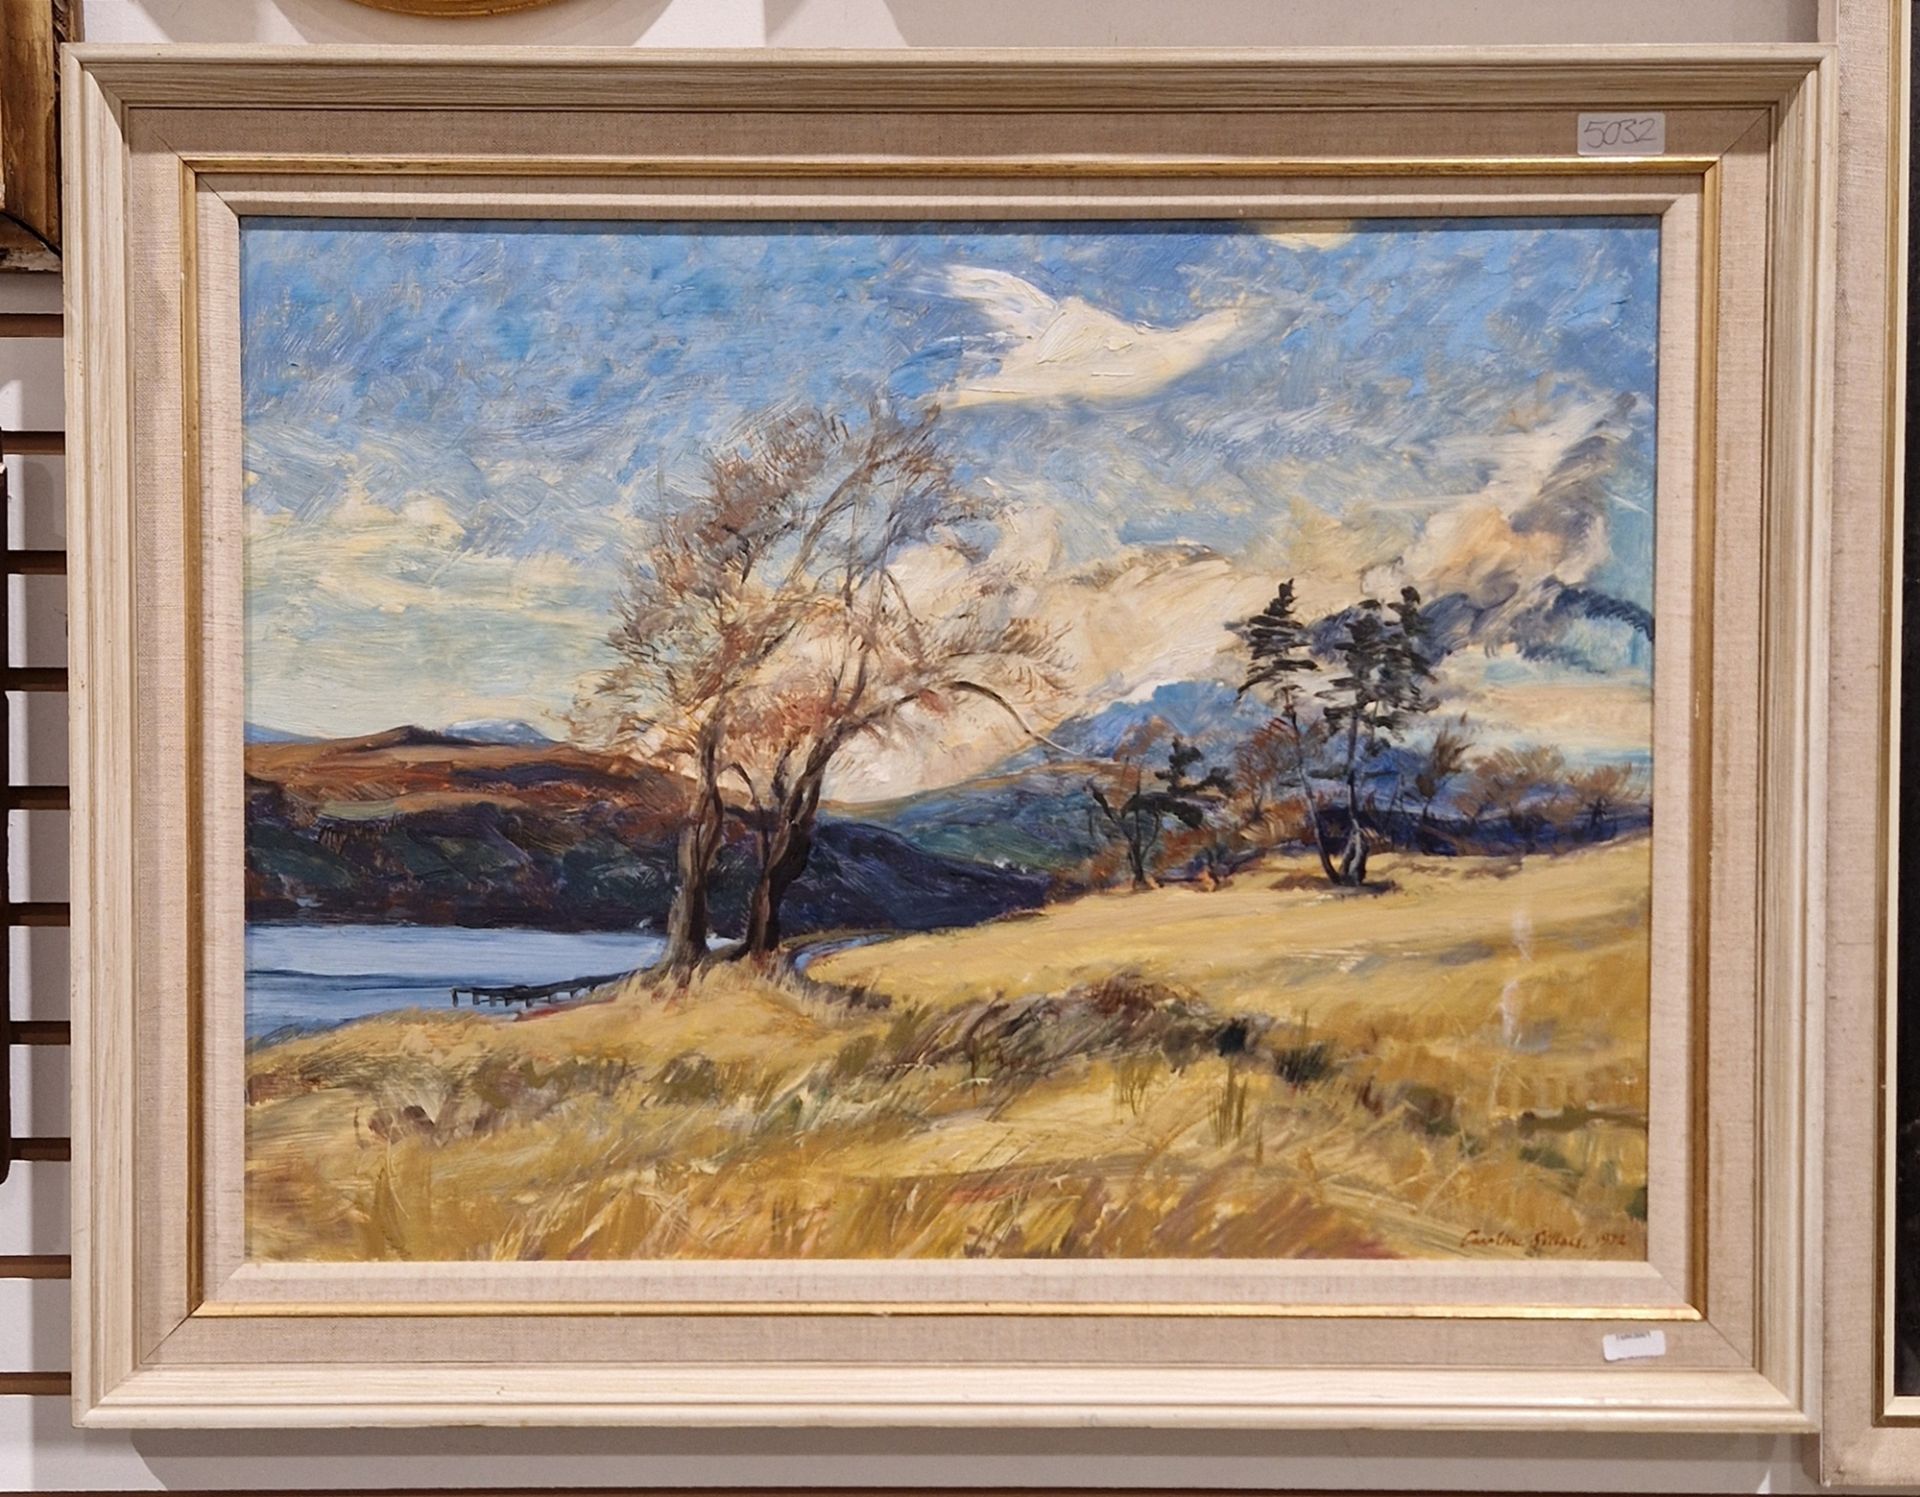 Caroline Sillars (1933-1988) Oil on board "The First Snow on Creacham Mor", (sic) signed and dated - Image 2 of 3